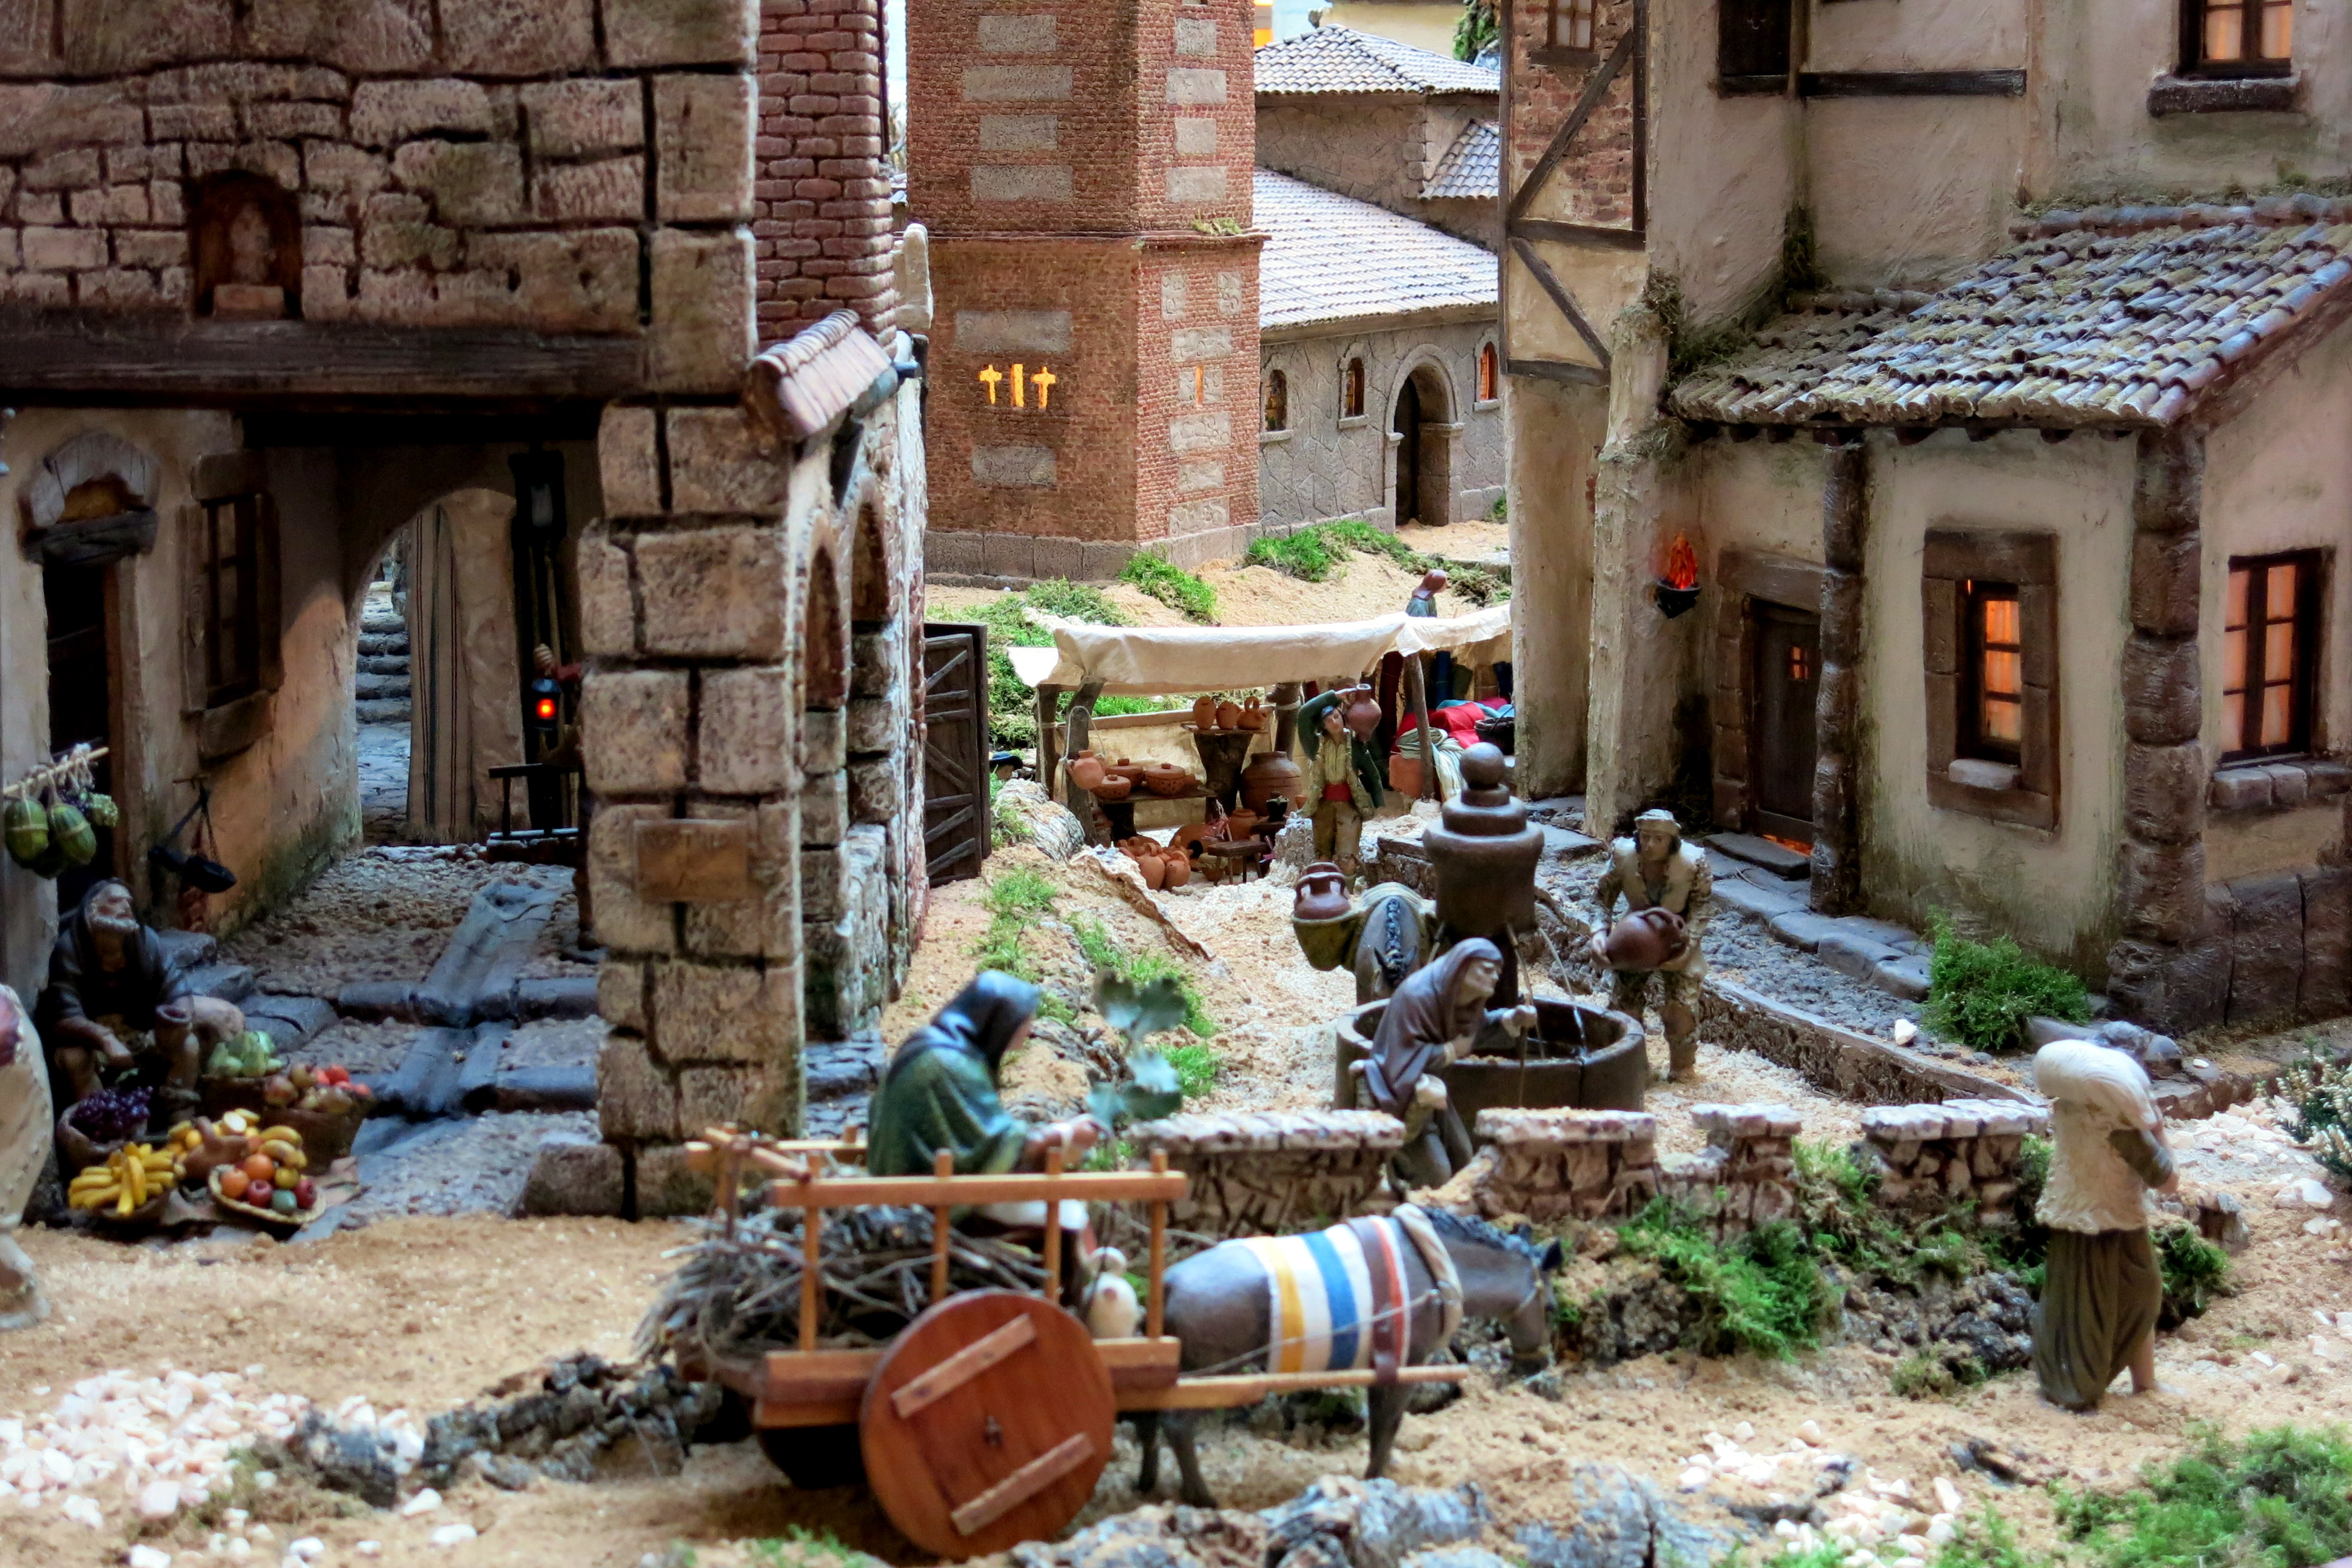 nativity scene recreated with houses and people